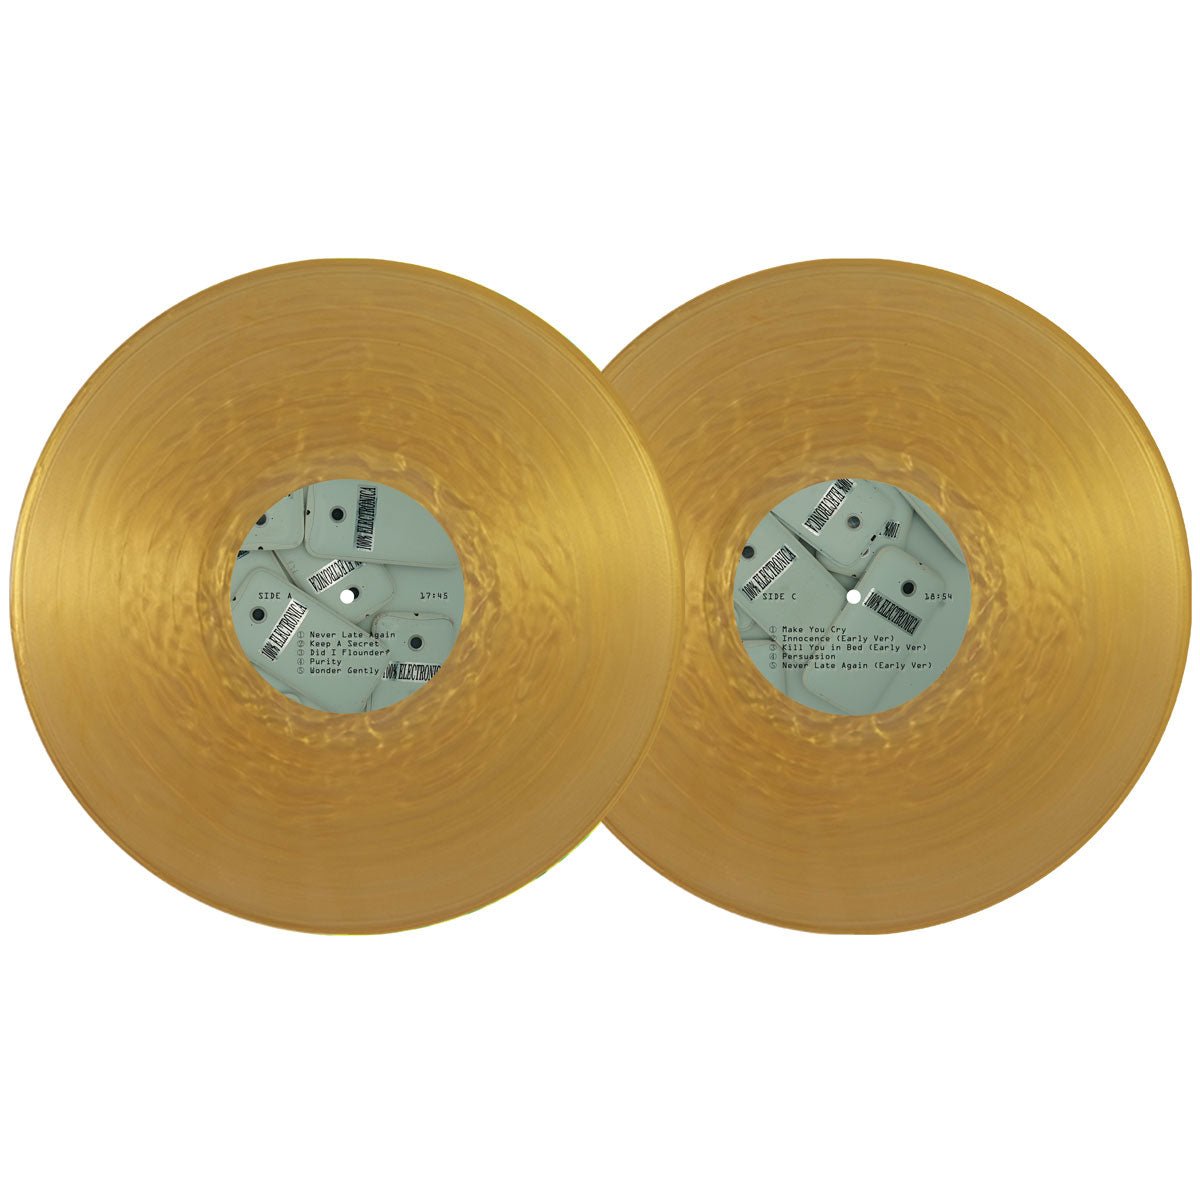 George Clanton Fan Club - 100% Electronica 2xLP [5 Year Anniversary Deluxe Gold Fan Club Exclusive] - 100% Electronica Official Store (Photo 2)